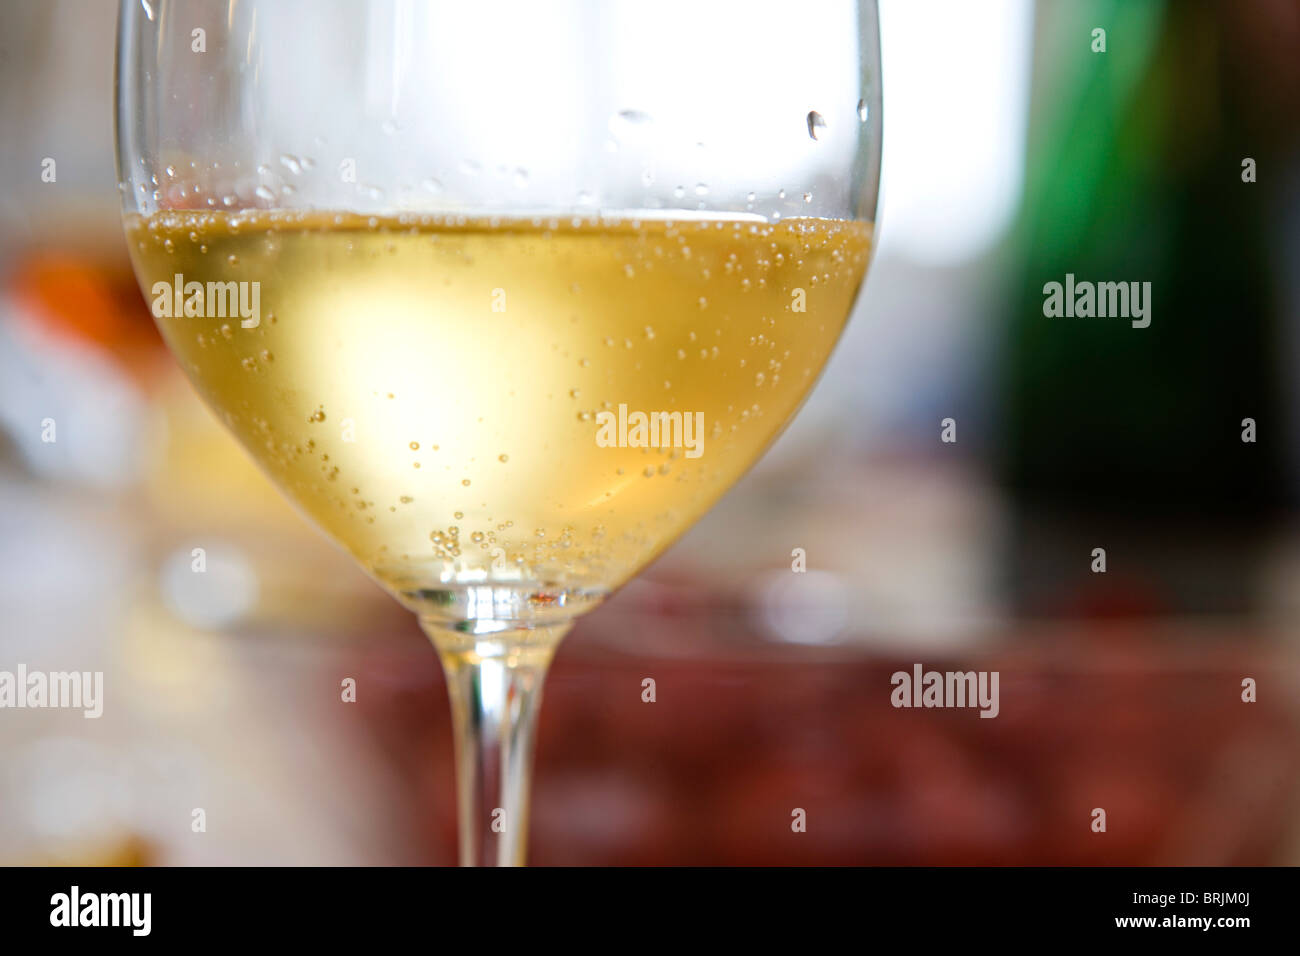 Droplets of condensation on glass of chilled white wine Stock Photo